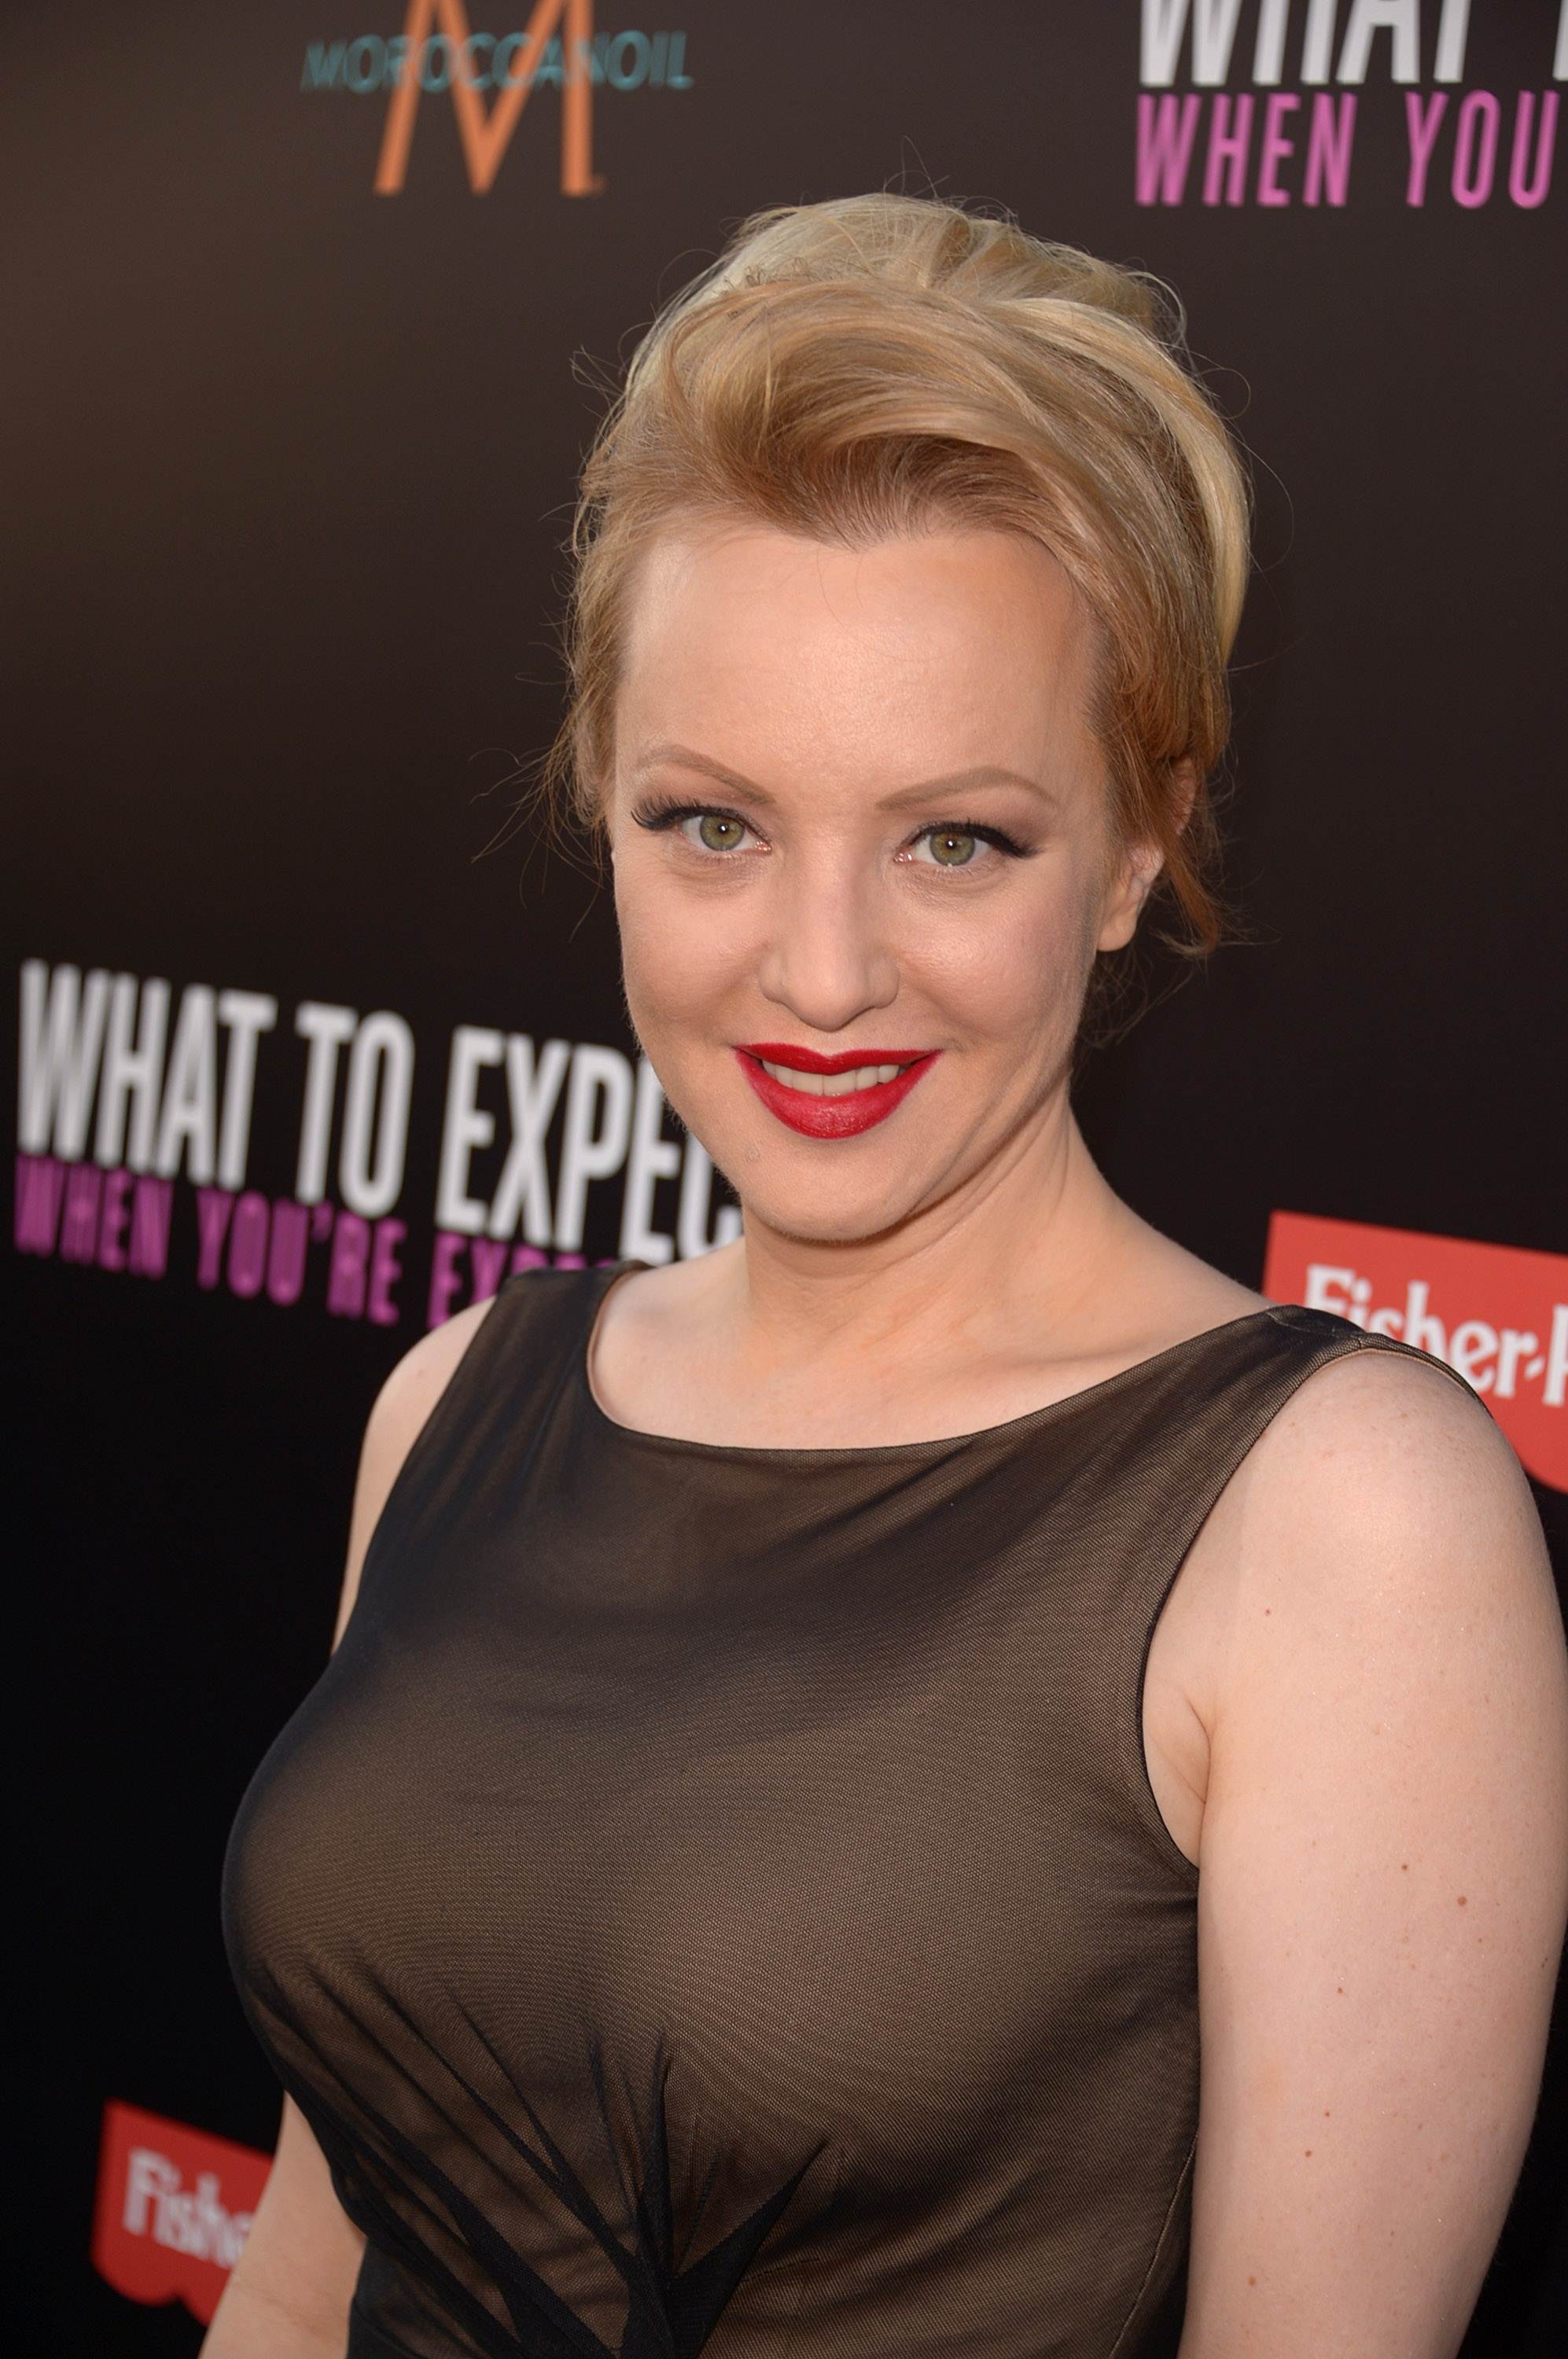 wendi-mclendon-covey-pictures